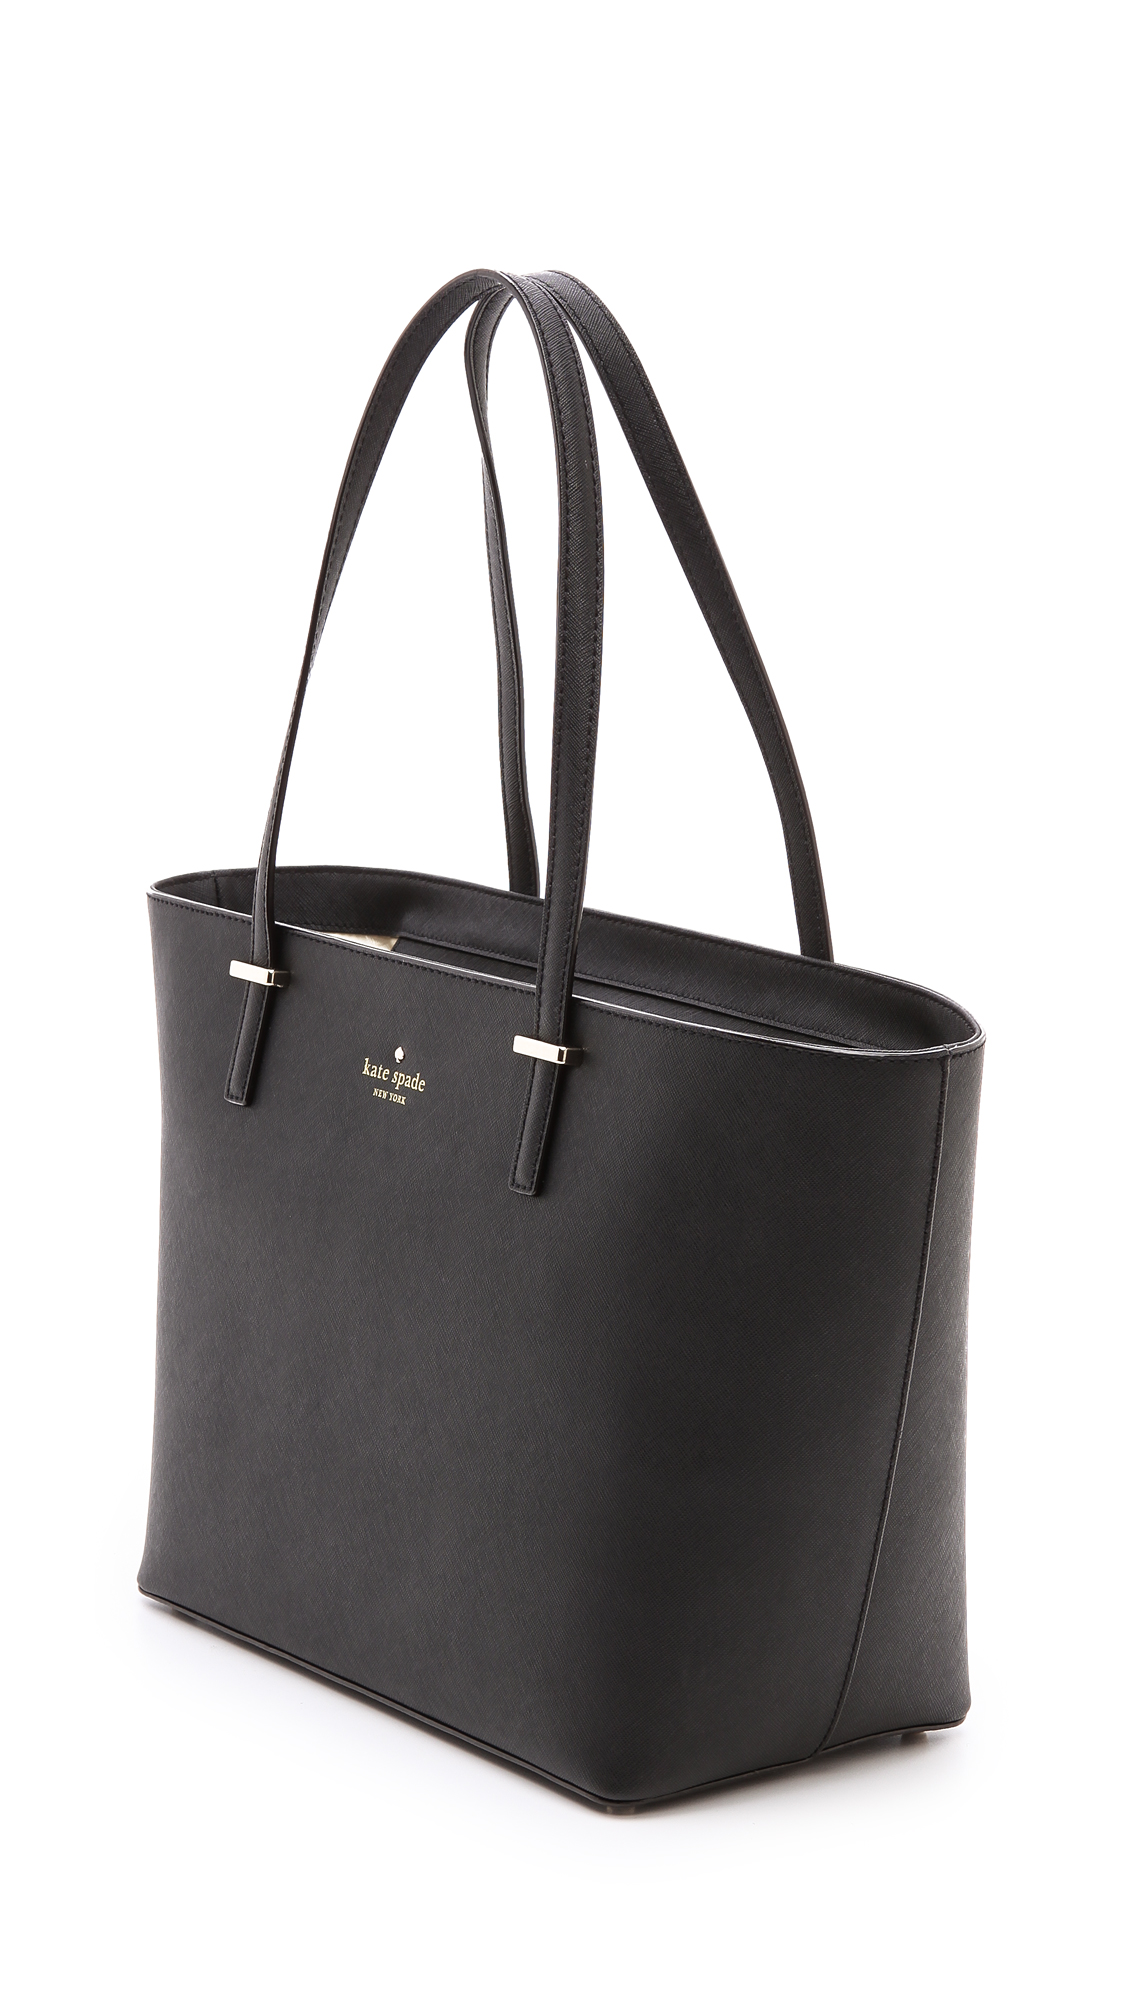 Kate Spade Leather Small Harmony Tote in Black - Lyst